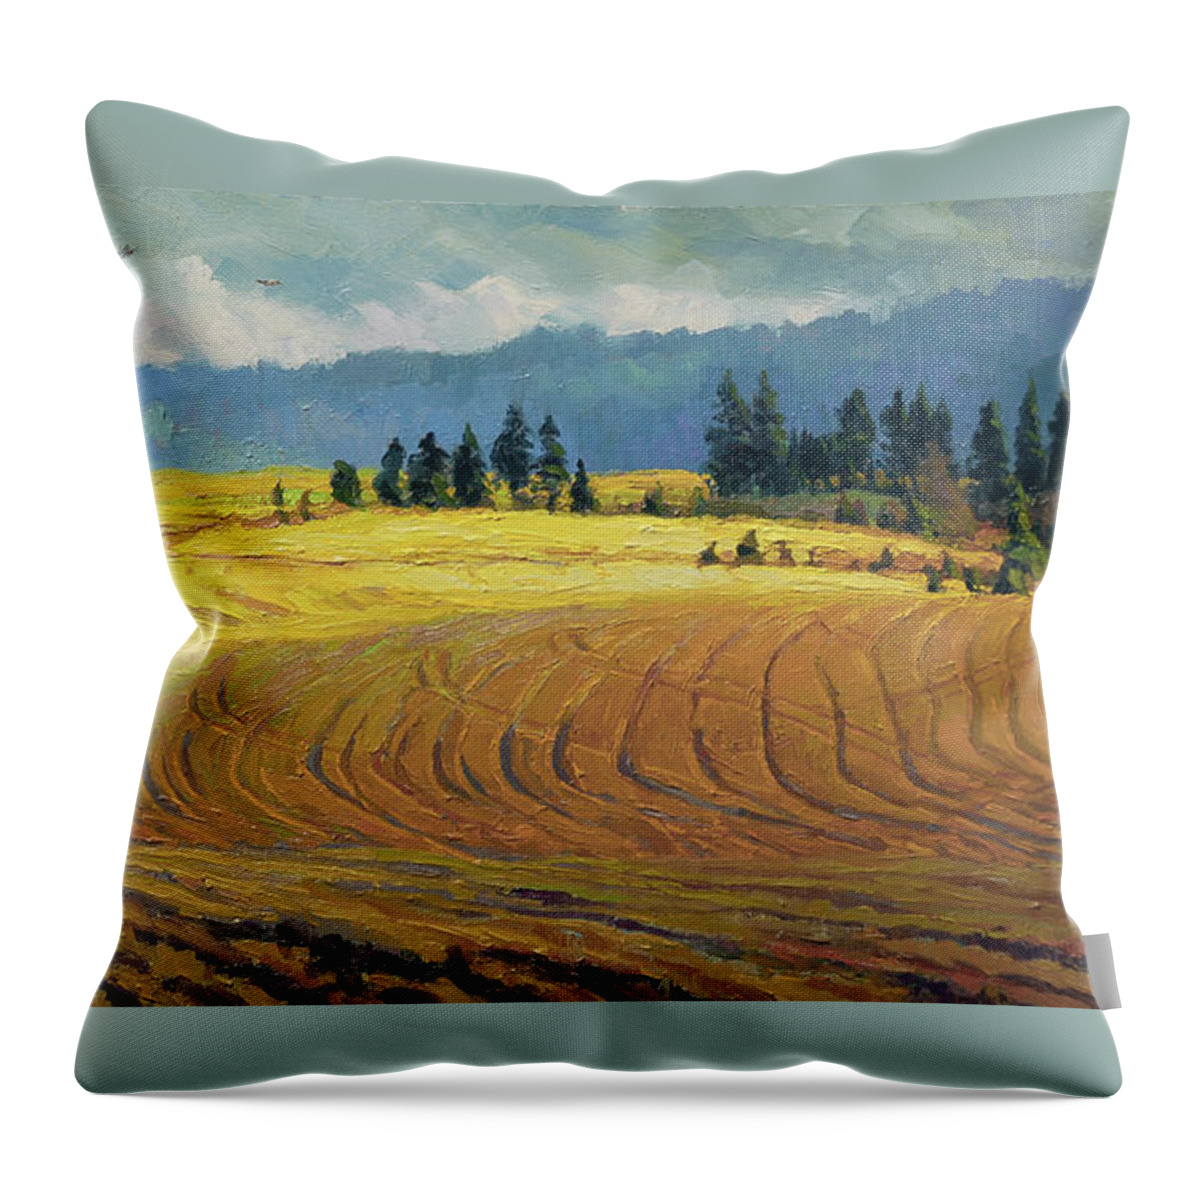 Country Throw Pillow featuring the painting Pine Grove by Steve Henderson